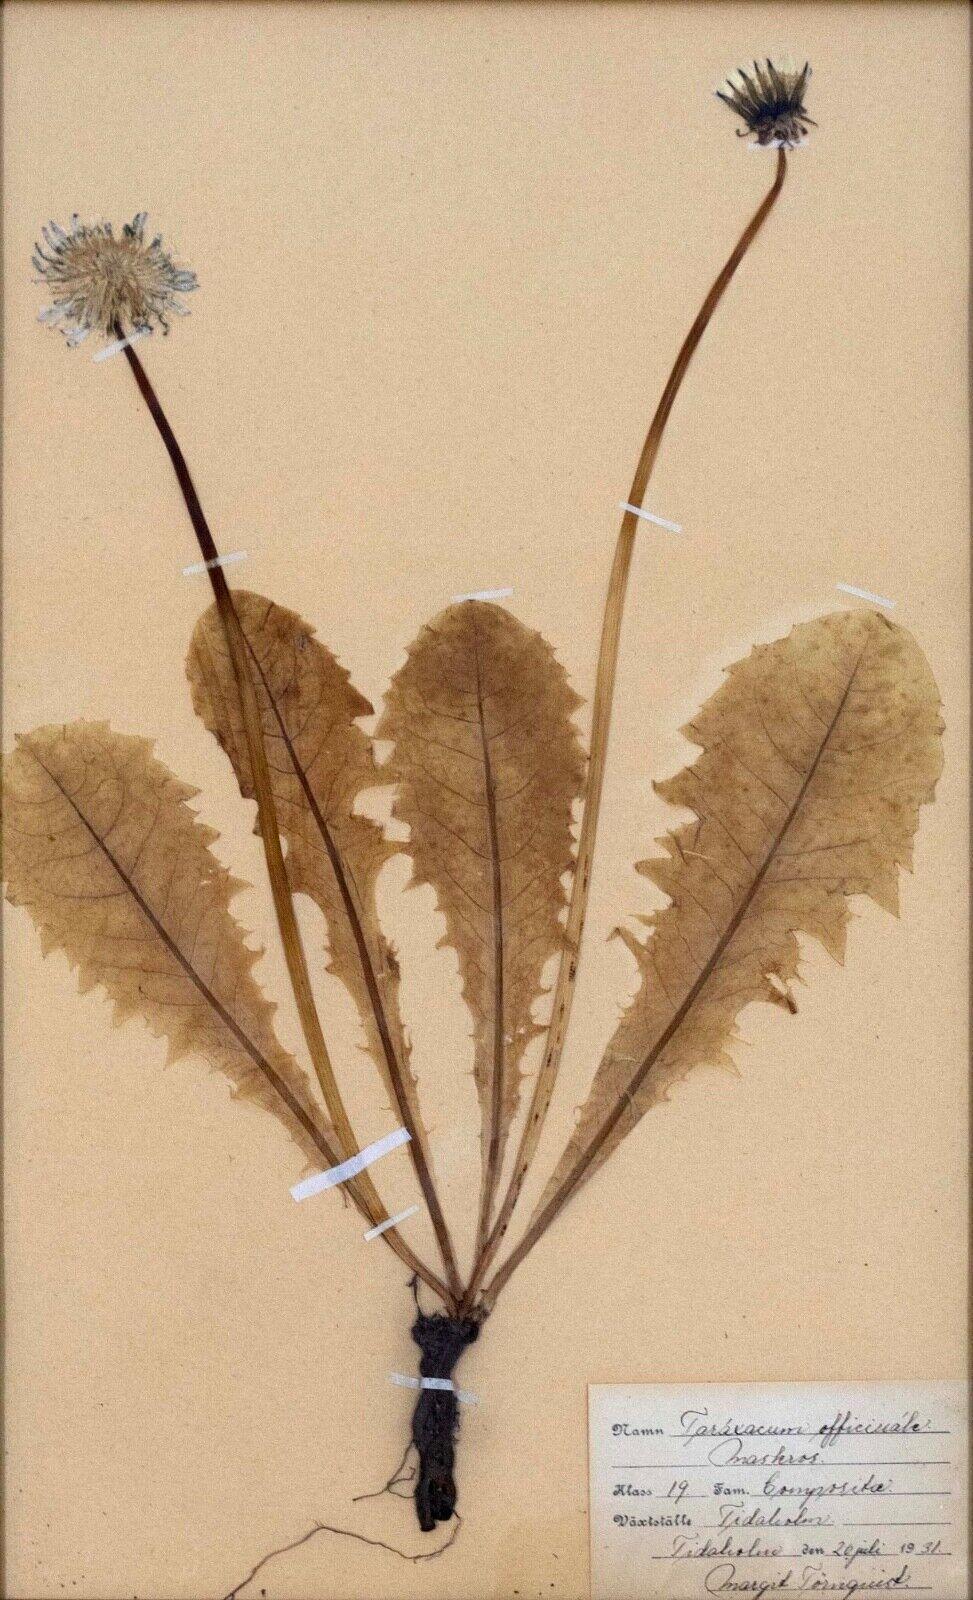 An antique Swedish pressed plant botanical specimen known as a “Herbarium.” Vintage Scandinavian art. Dated 1931. A lovely curiosity showcasing the artistry found within nature. From a private collection. Dimensions: 17”h x 10.5”w x .75”d (framed).
